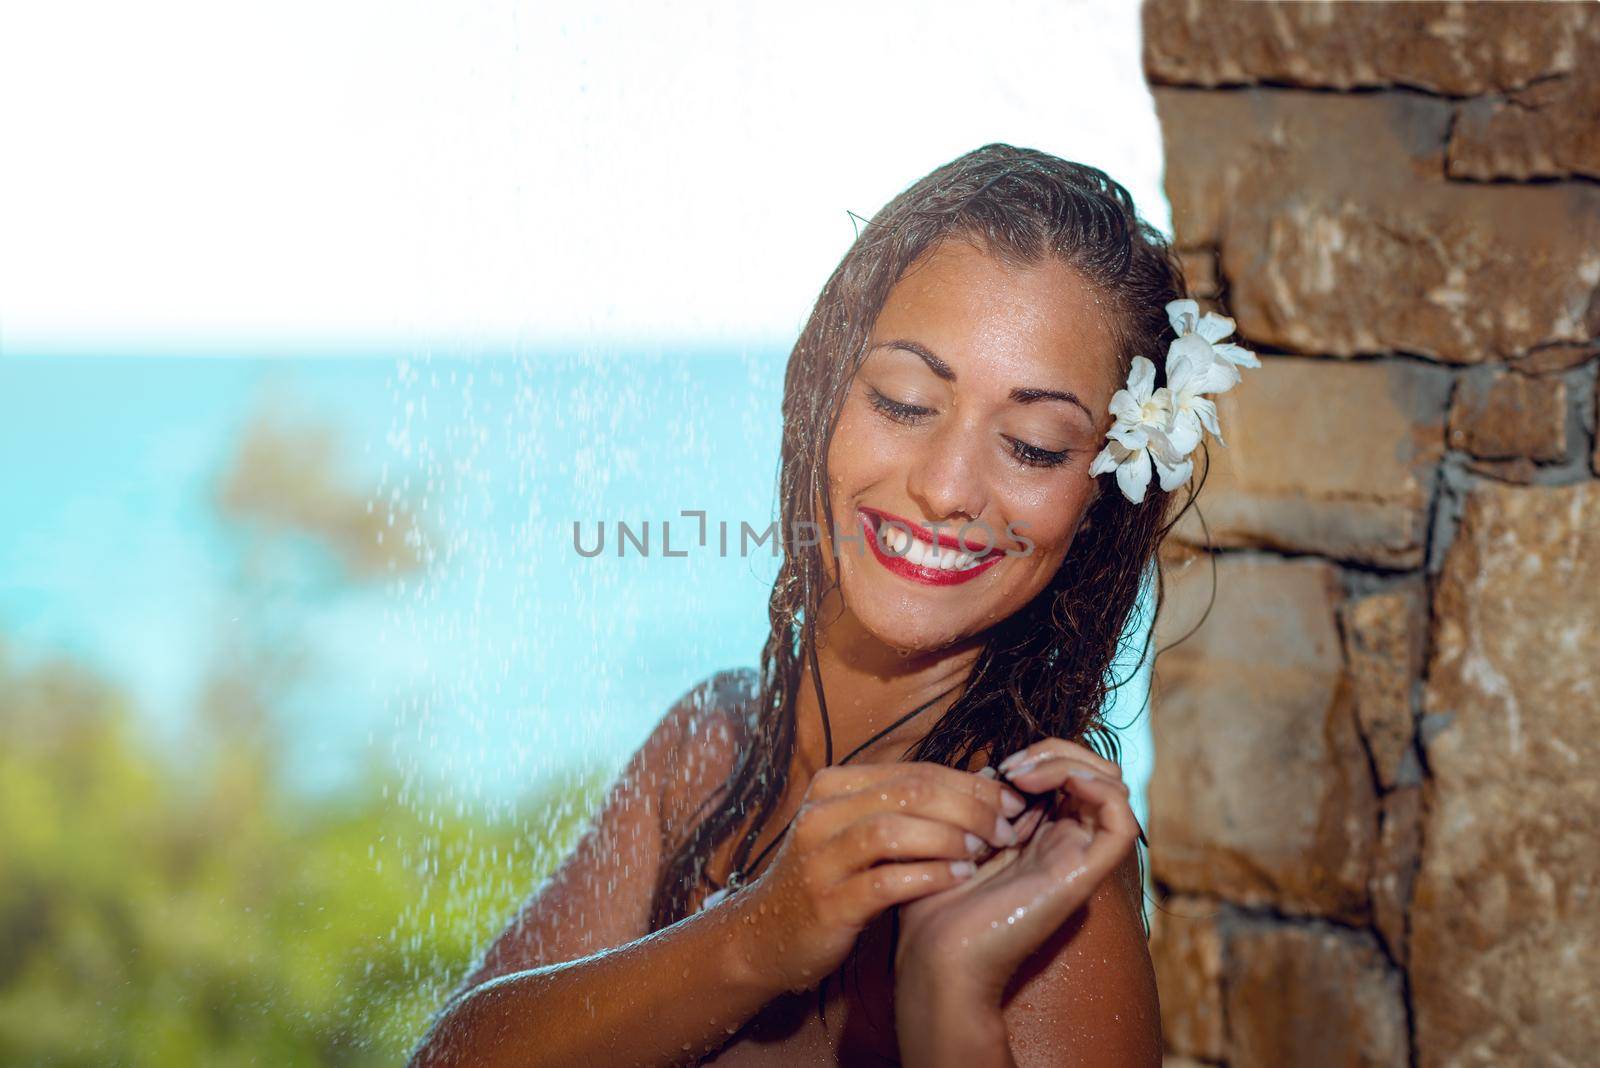 Beautiful young woman enjoying under a shower on the beach daydreaming about love.